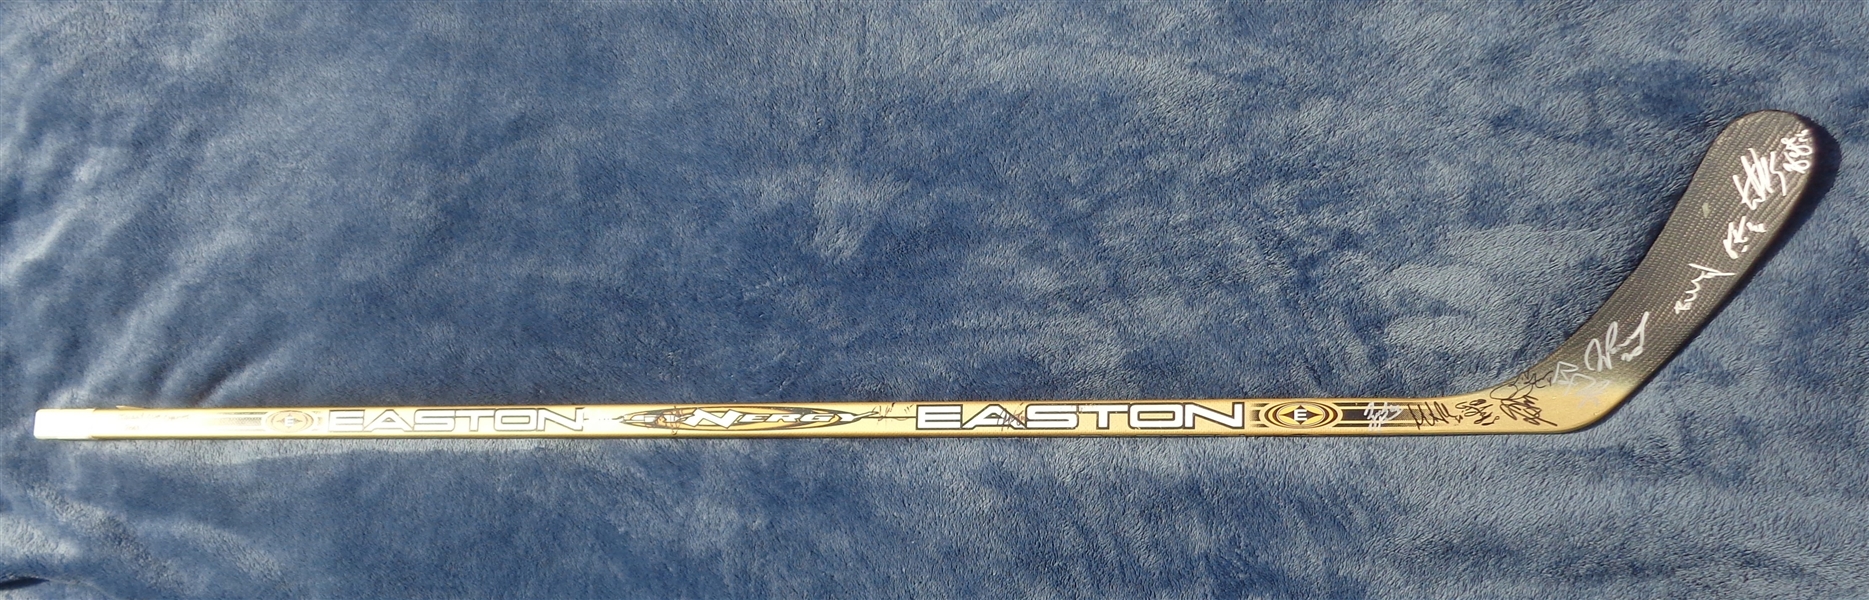 2003 Stanley Cup Champions NJ Devils Team Signed Official Easton Hockey Stick